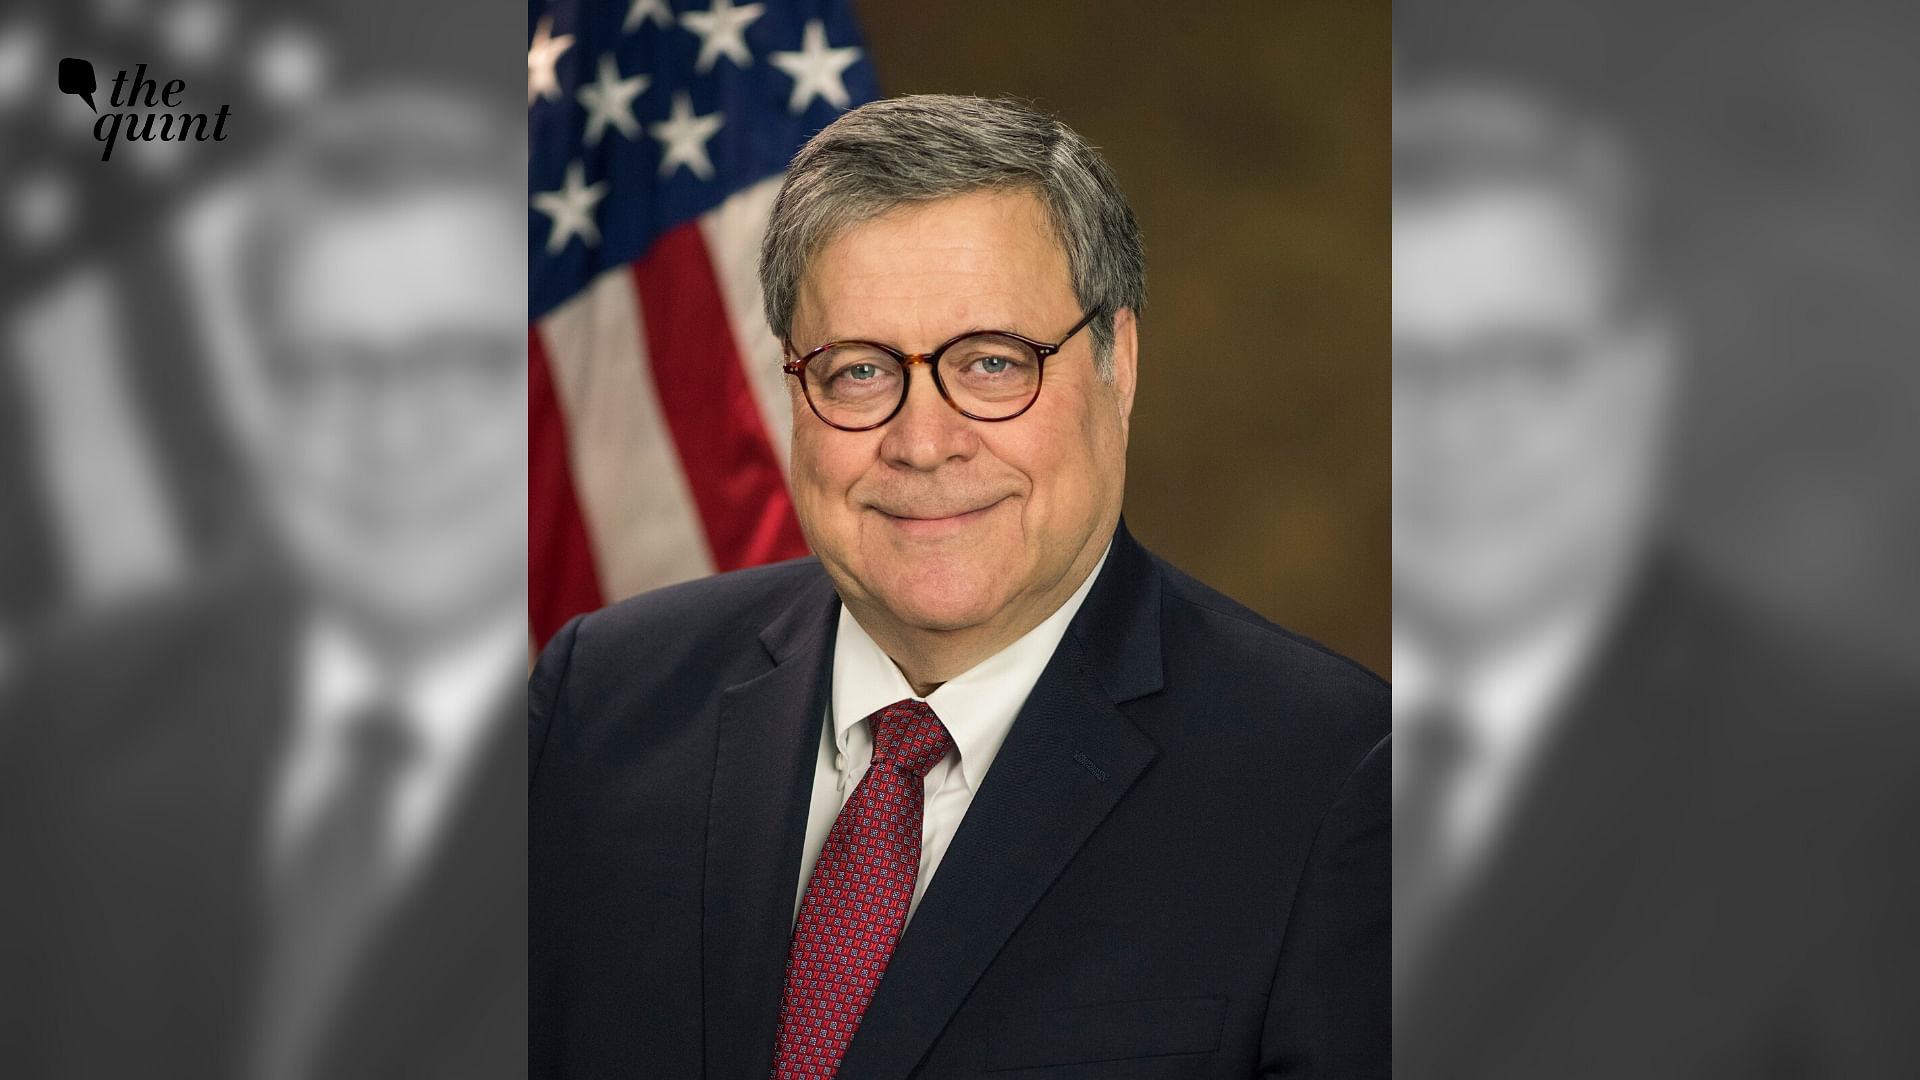 US Attorney General Bill Barr has accused Donald Trump of hampering the work of the Justice Department.